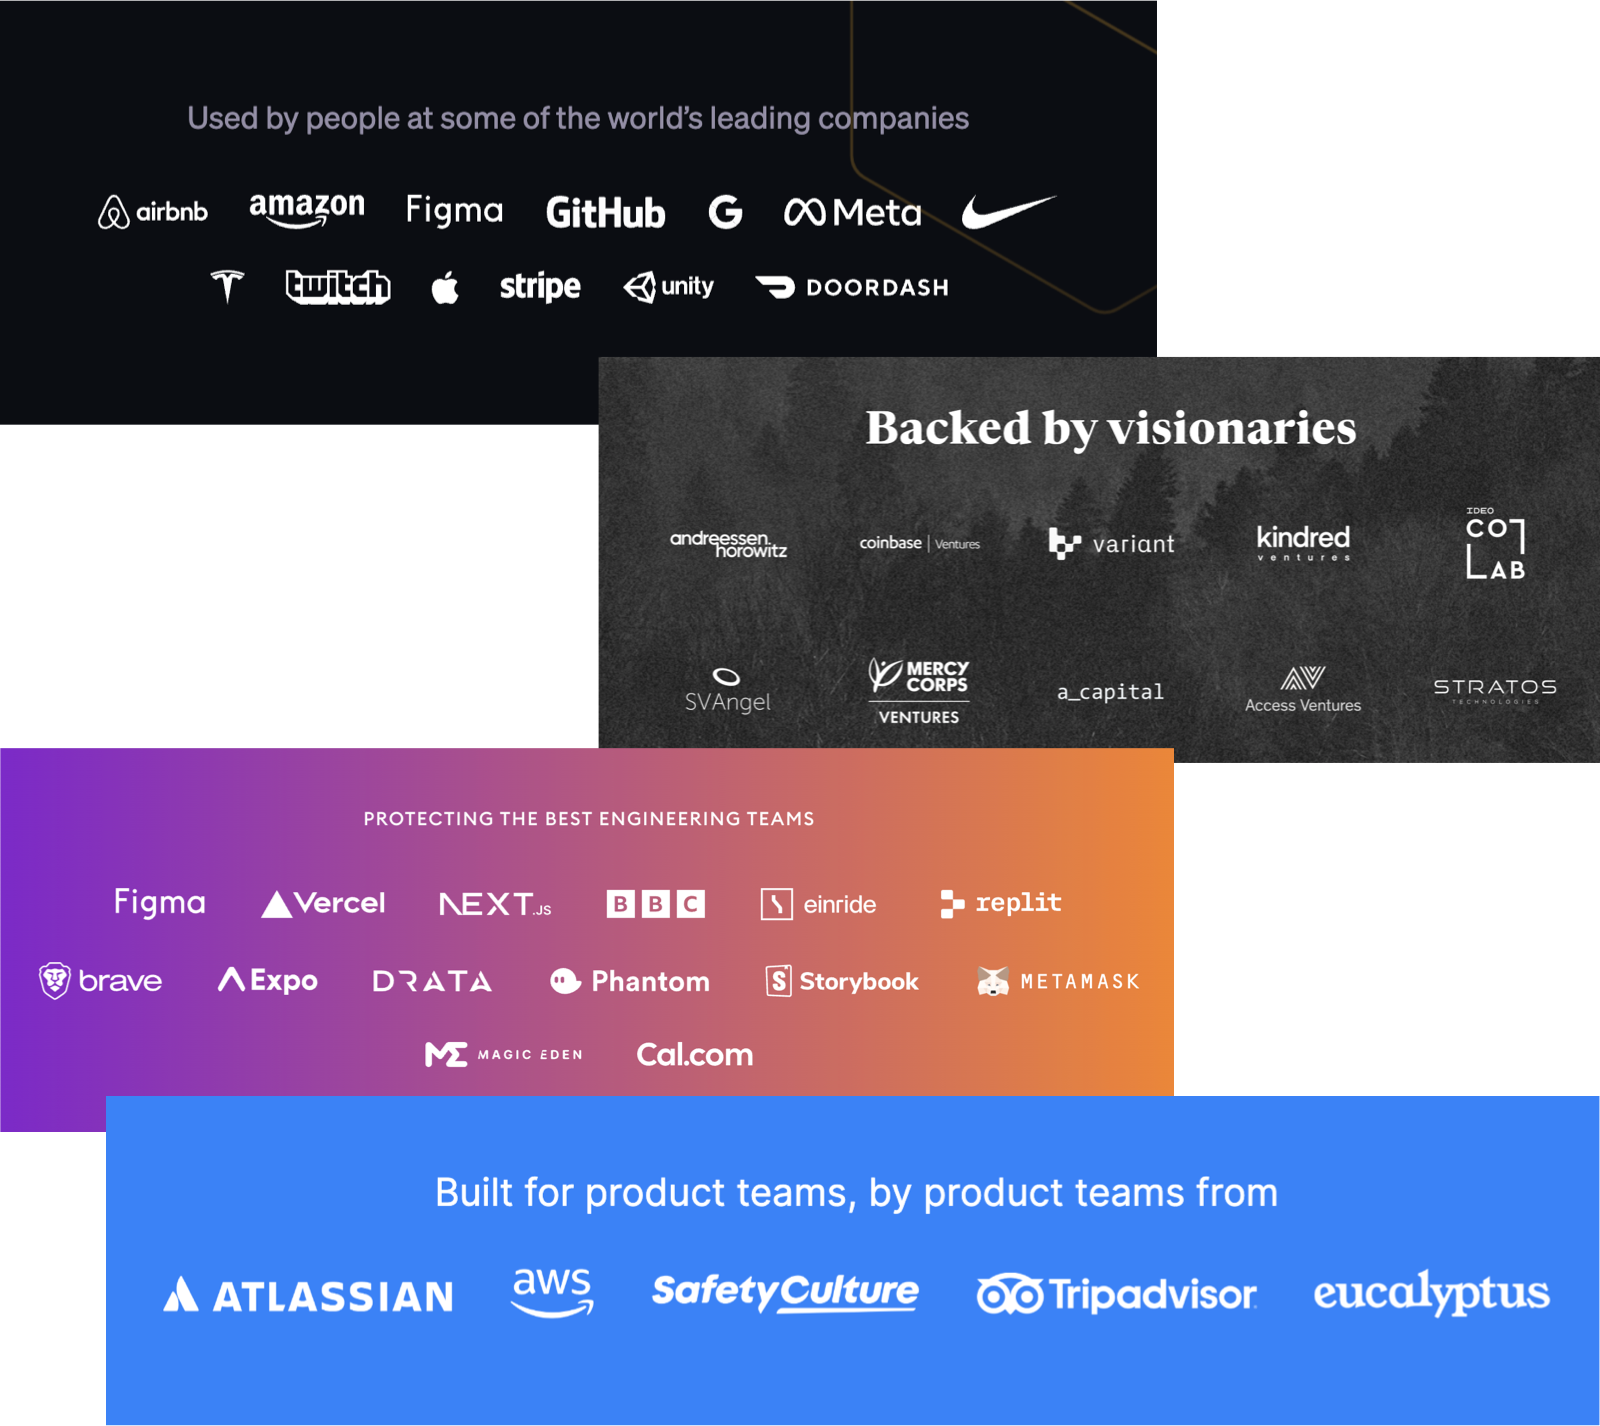 Tana.inc lists the employers of its customers on its website. The Goldfinch.finance website lists its investors. Socket.dev lists its customers. Sauce.app lists the former employers of its founders.